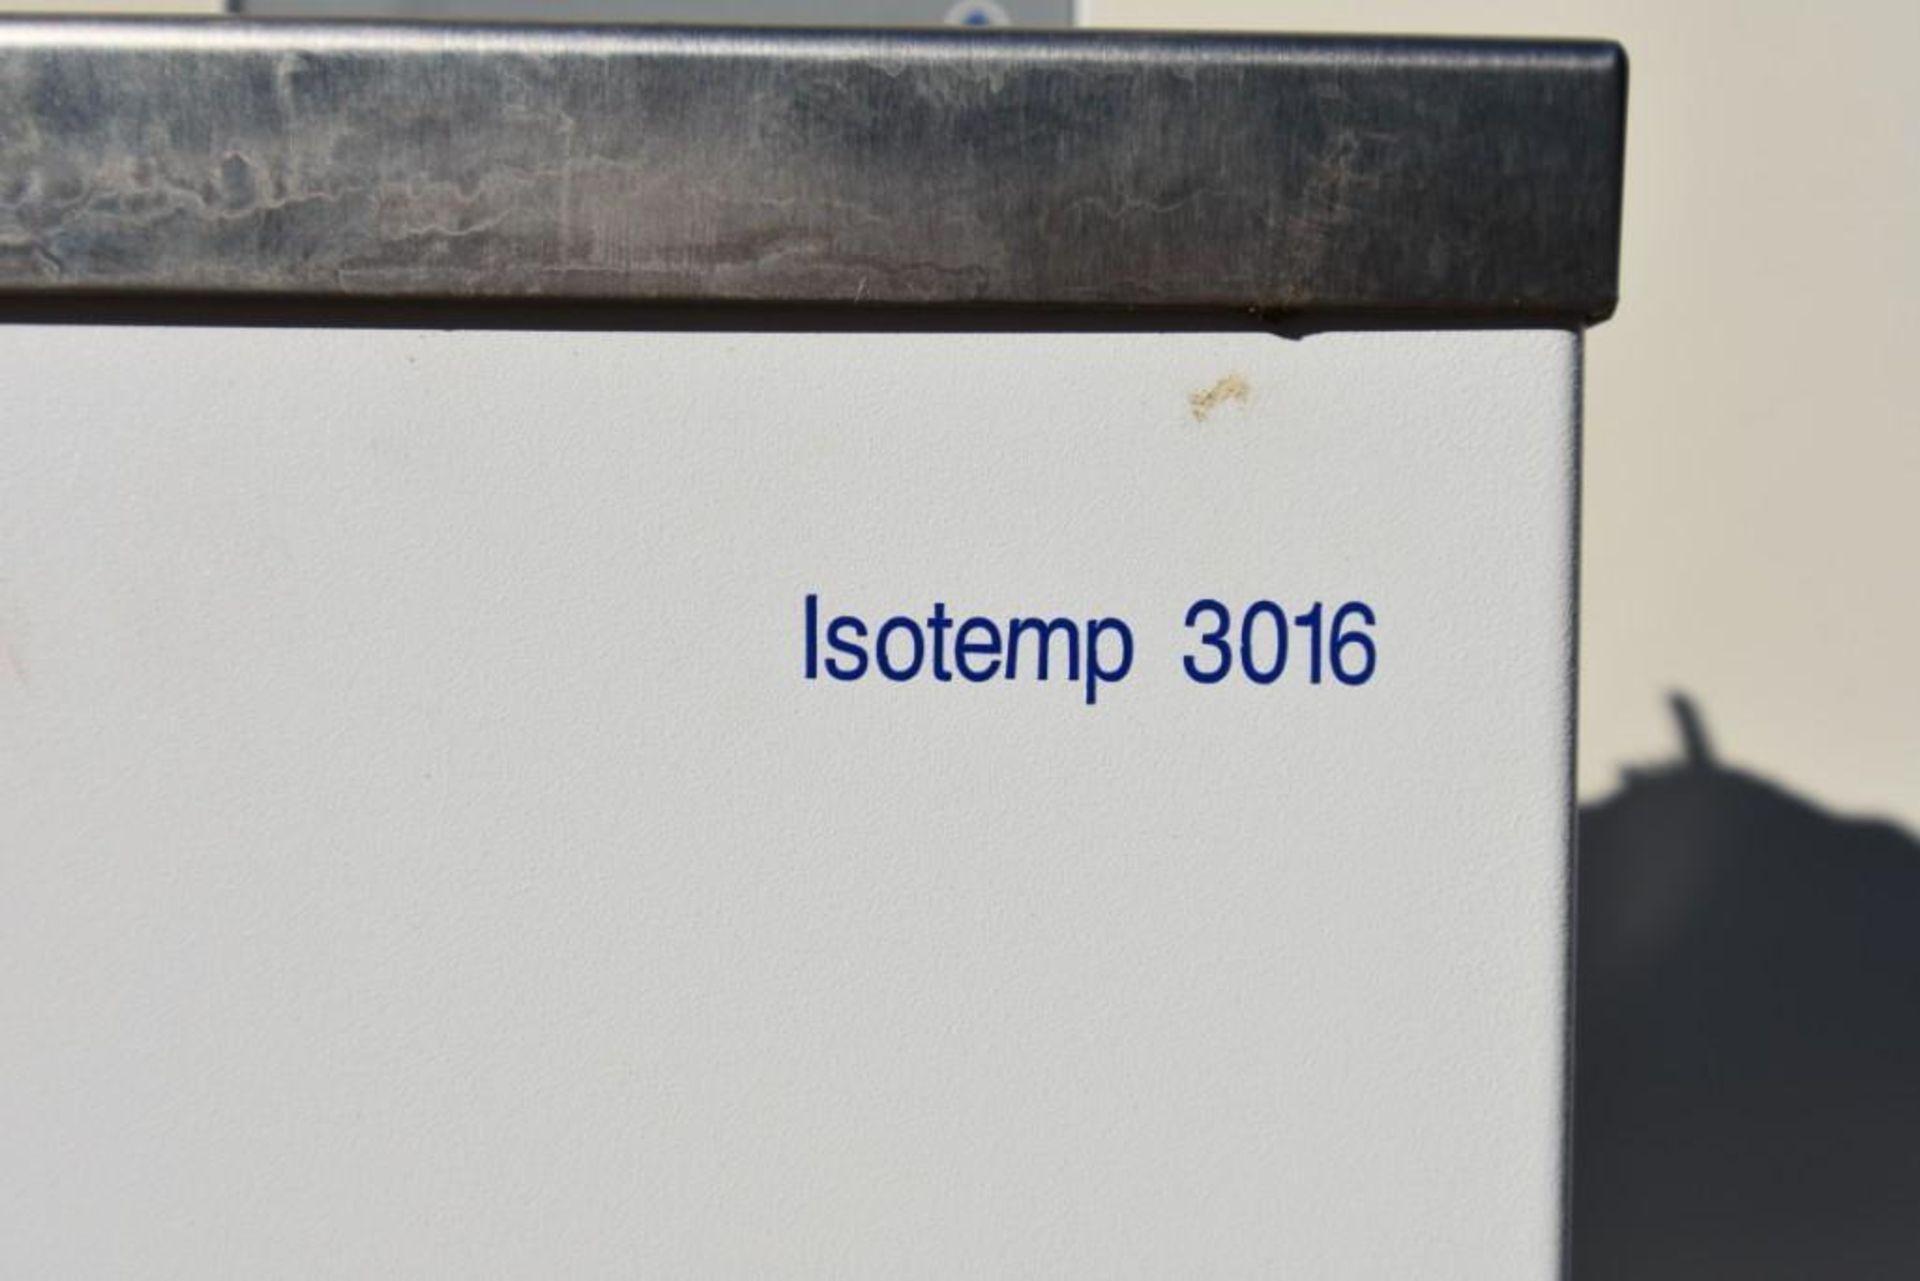 1-Used Fischer Scientific Isotemp 3016 - Image 2 of 8